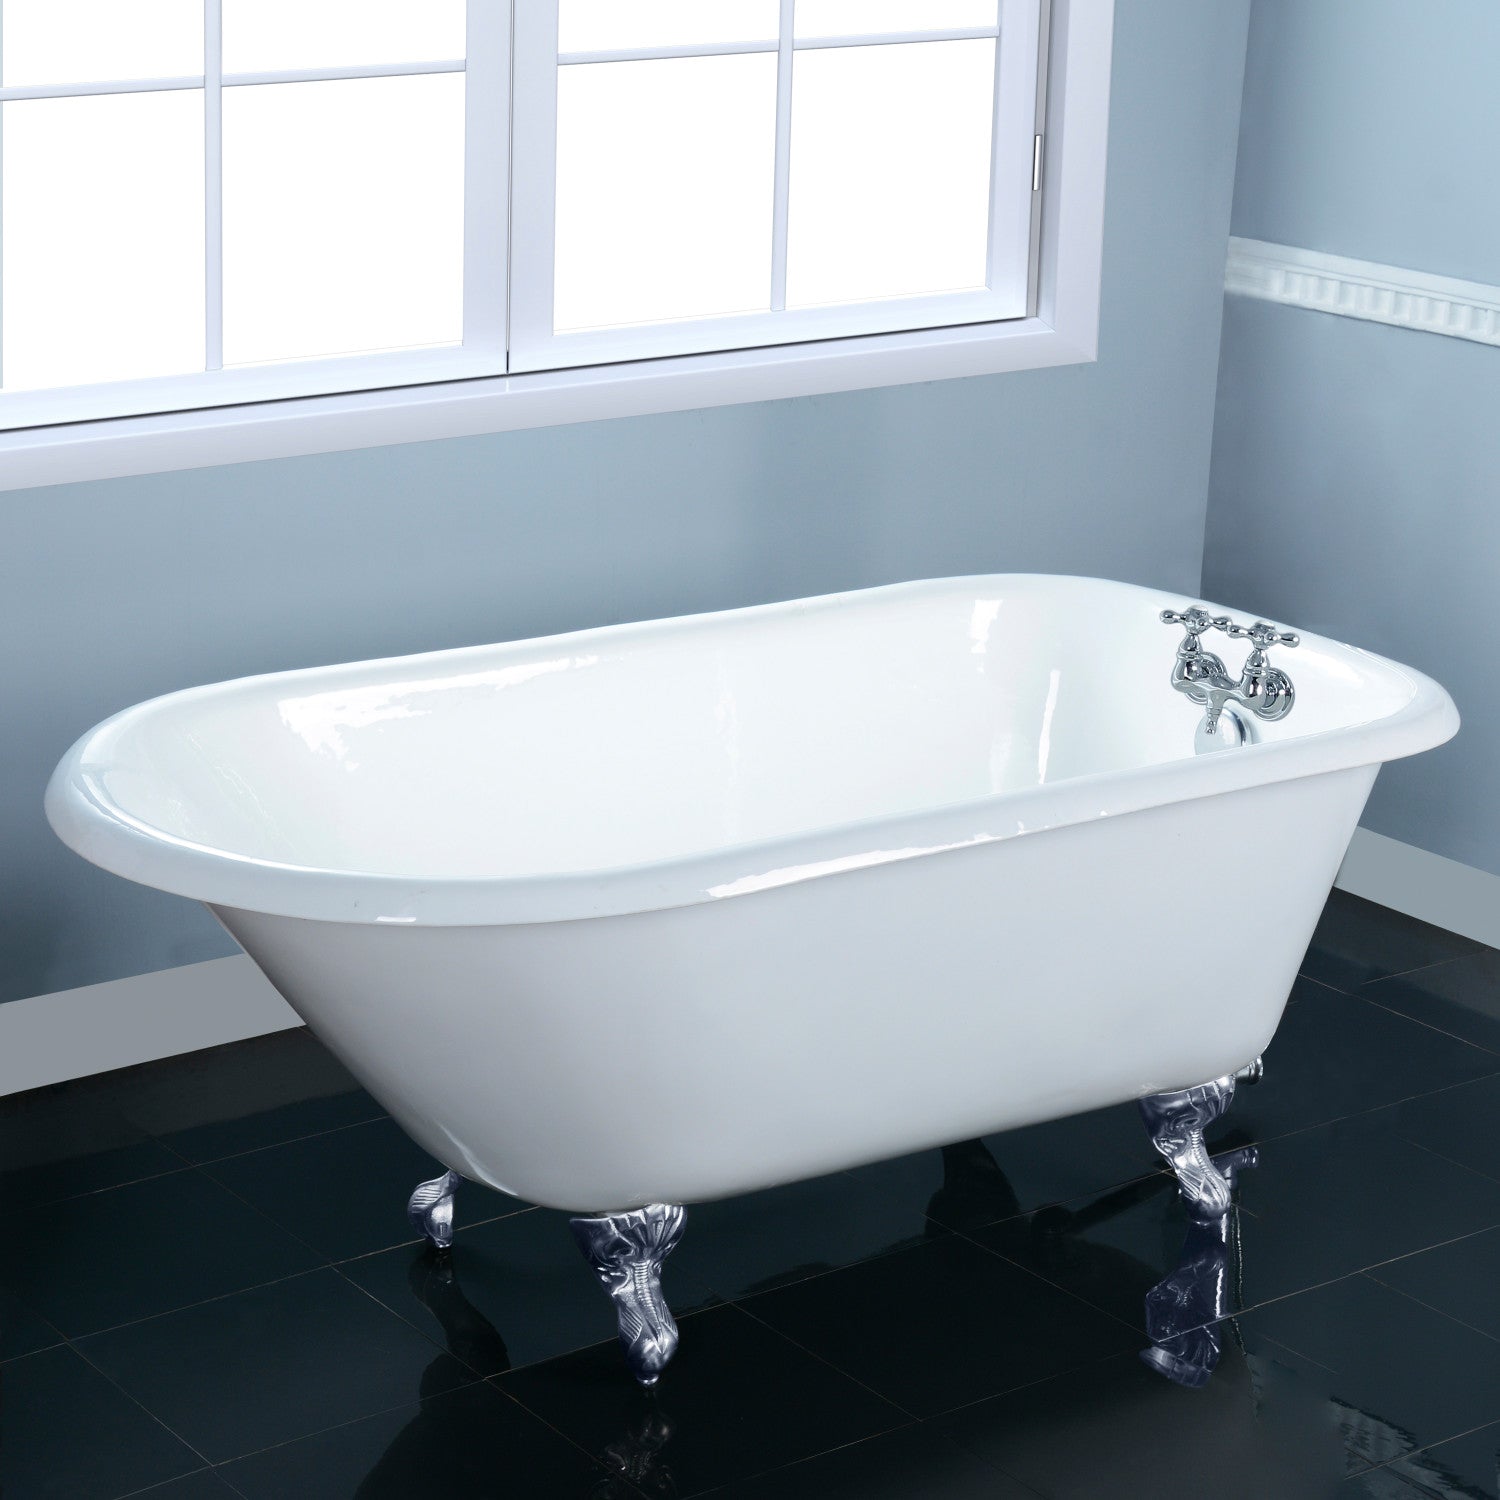 Tub Aqua with Kingston Eden Cast Roll 66-Inch VCT3D663019NT1 Iron Top Clawfoot Brass